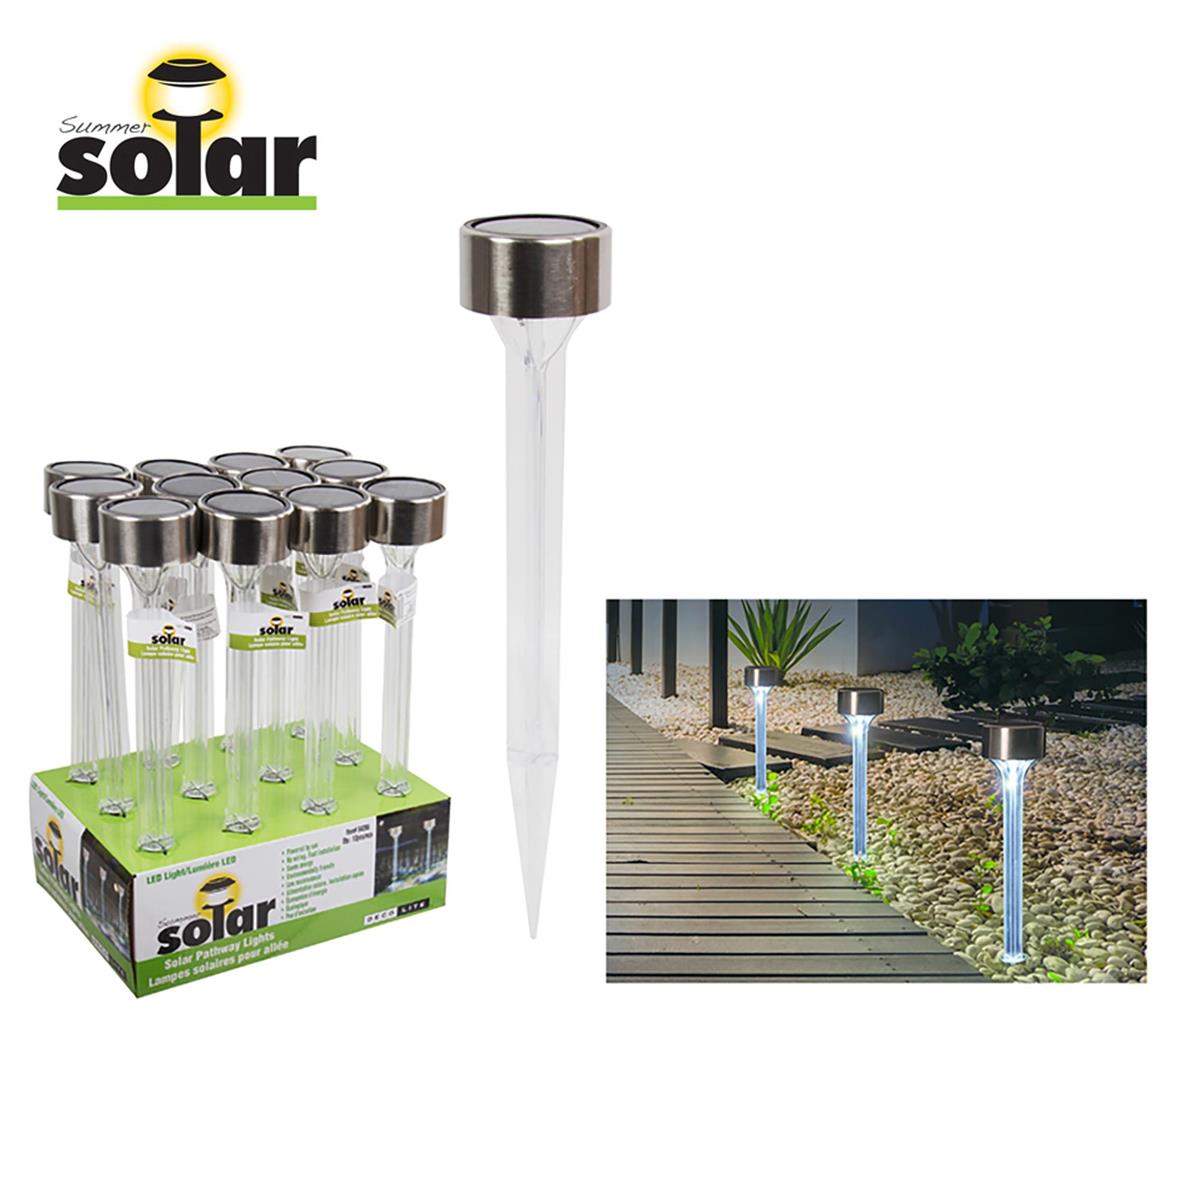 Solar 13"L LED Clear Stake Lights Plastic+Stainless Steel, 12/pdq